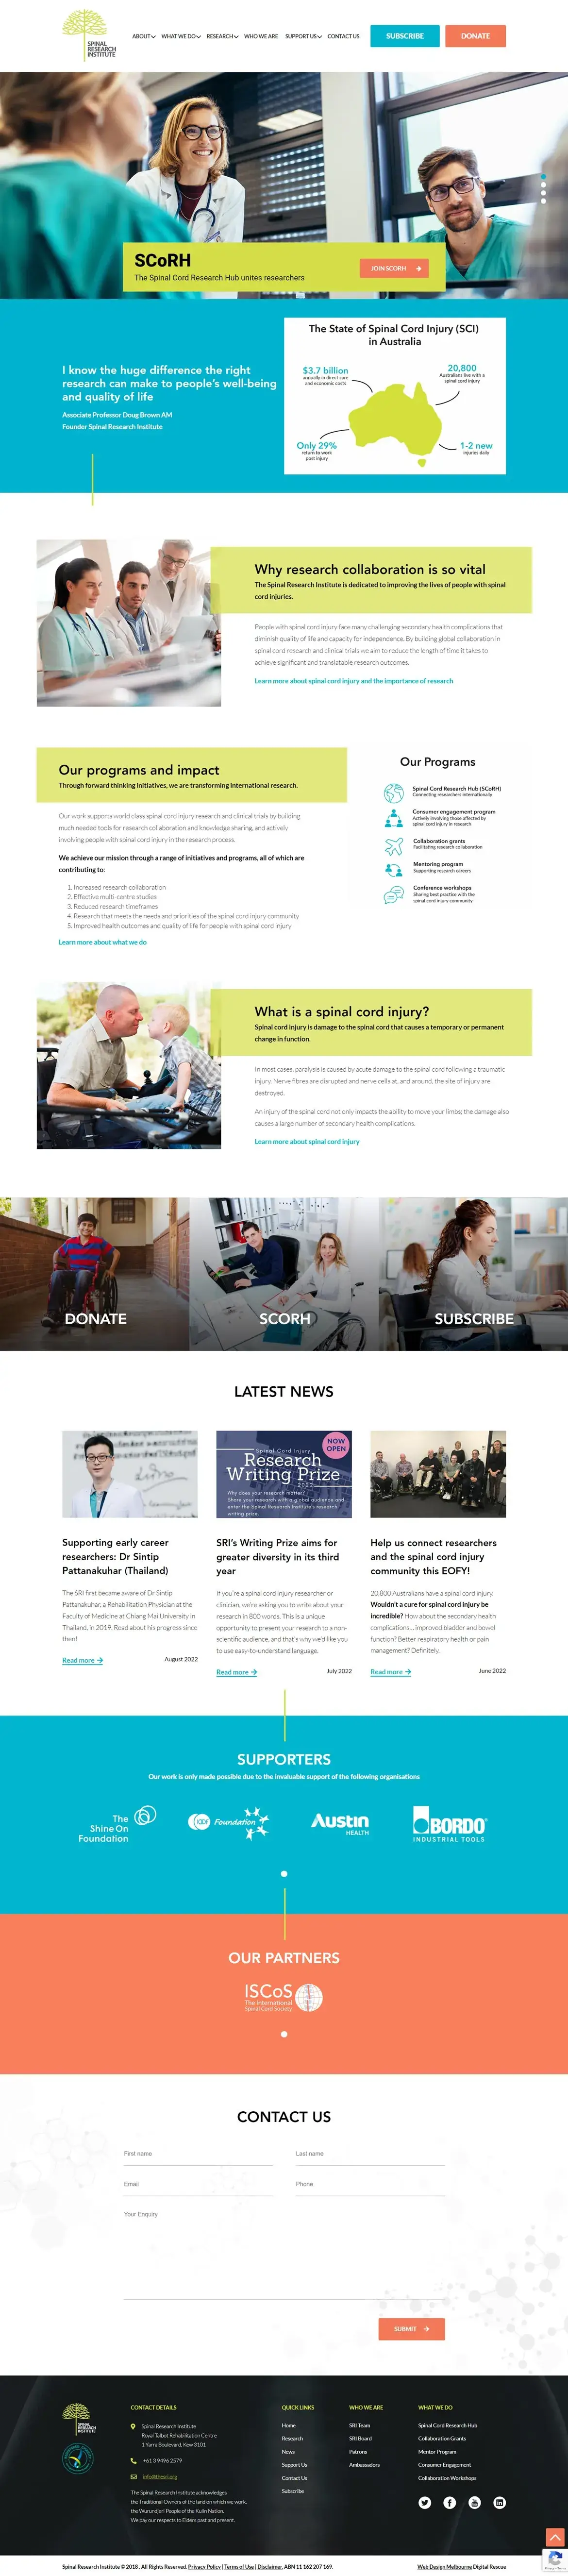 The Spinal Research Institute Home Page Website Design